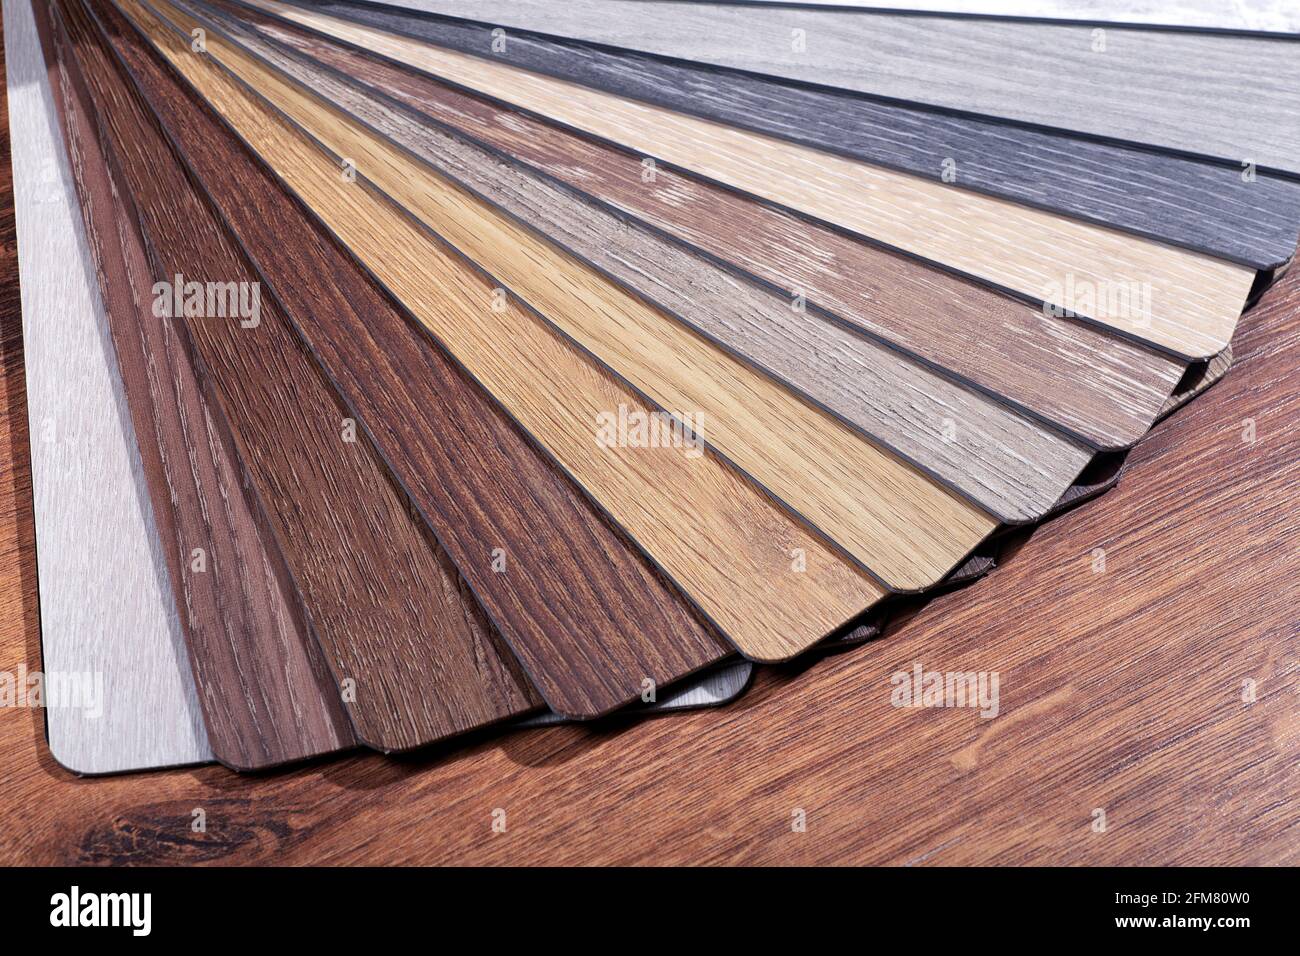 Vinyl and linoleum samples on a white isolated background. Vinyl for flooring with wood grain texture and pattern. High quality photo Stock Photo